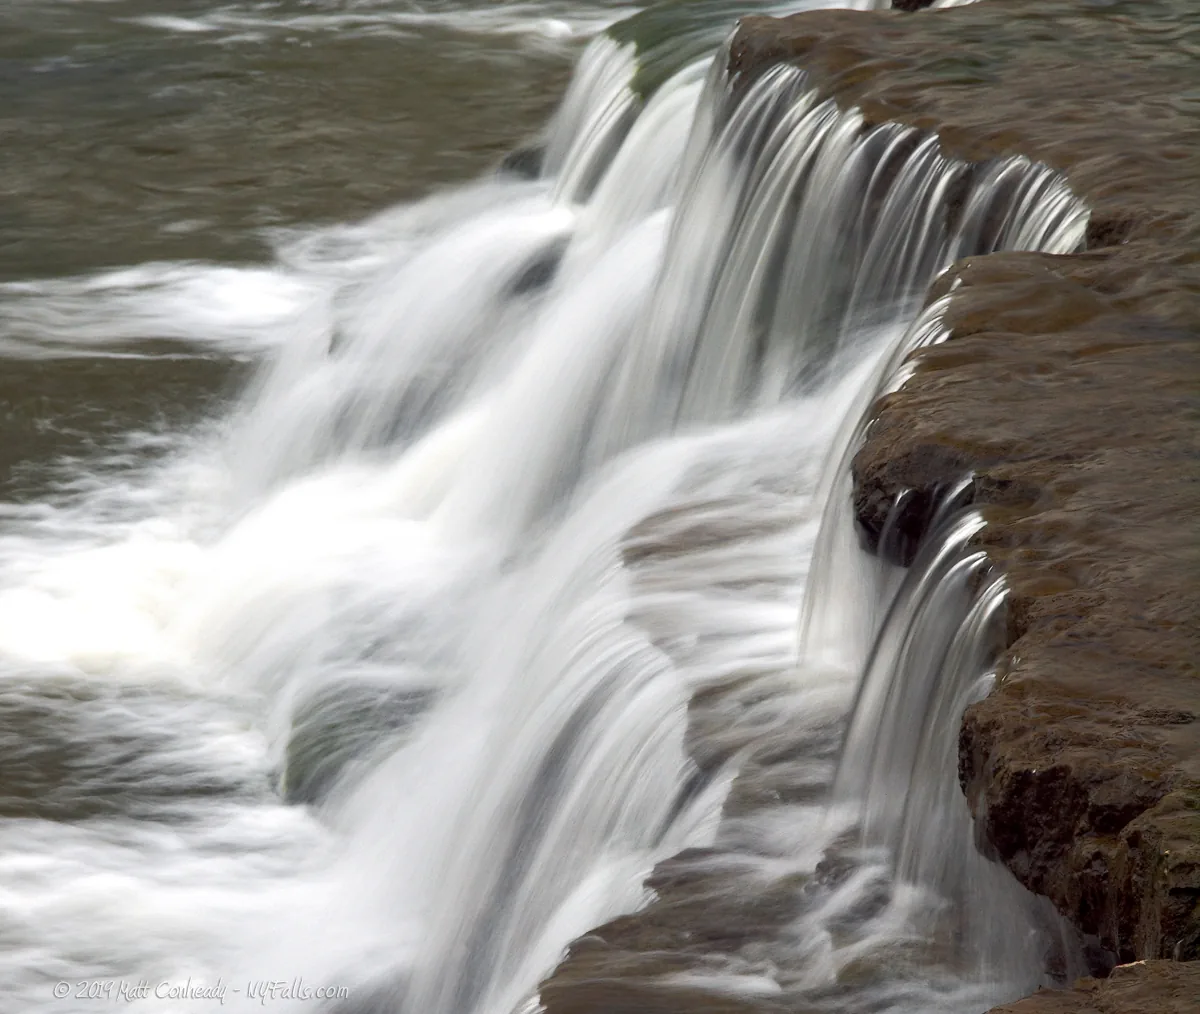 A closeup side view of LeRoy Falls and its irregular edge